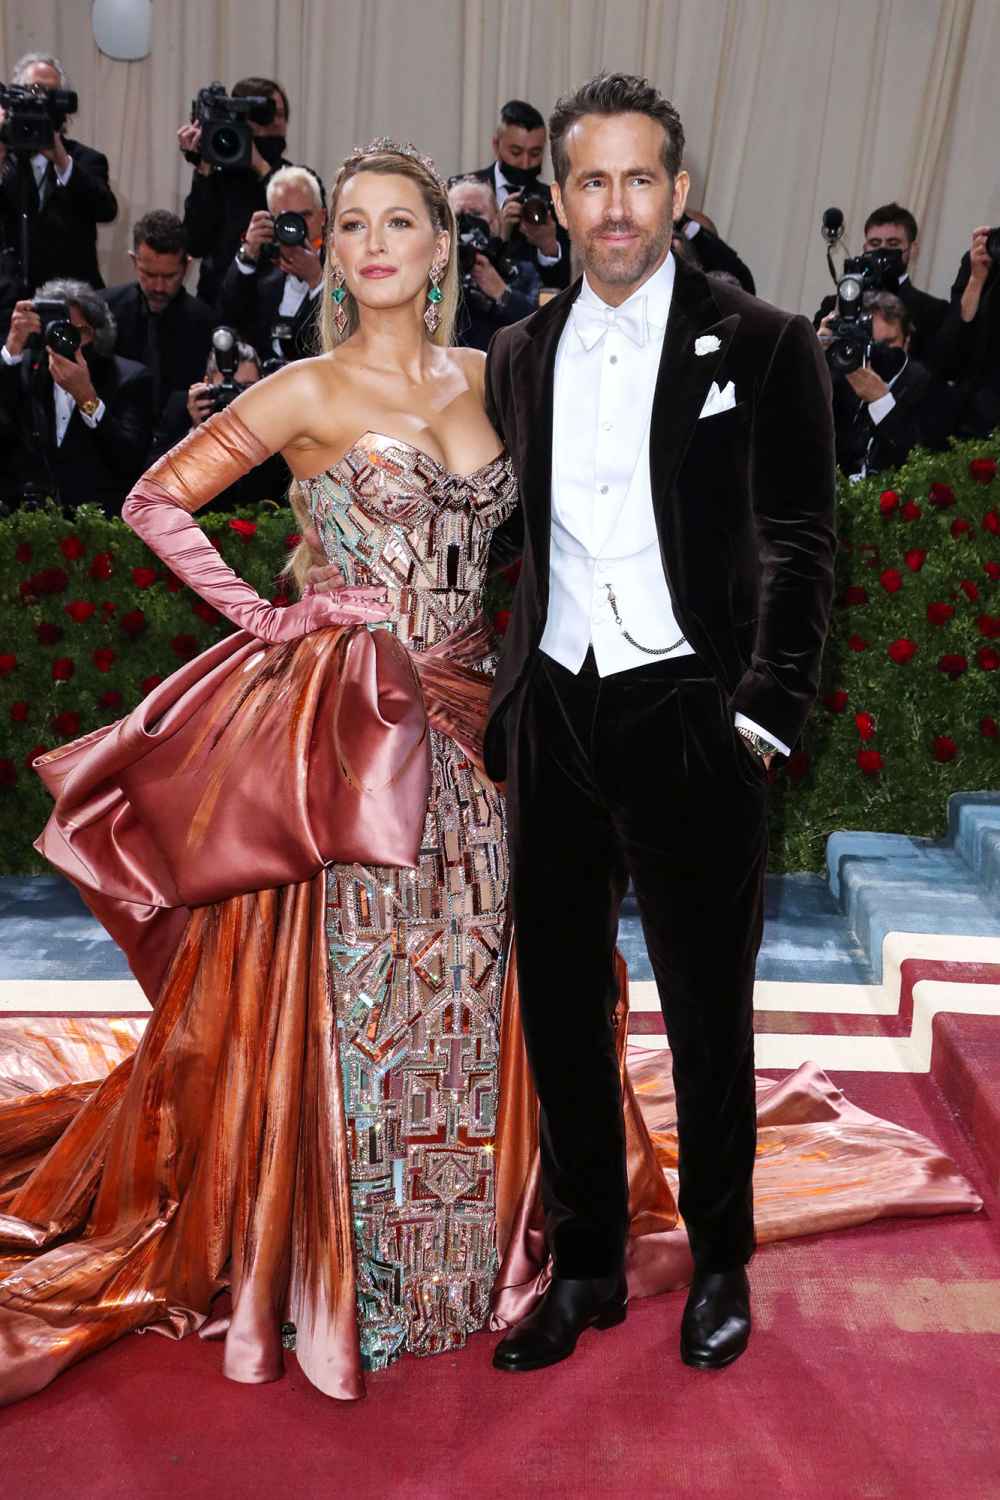 Met Gala 2022 Red Carpet Celebrity Outfits: Photos